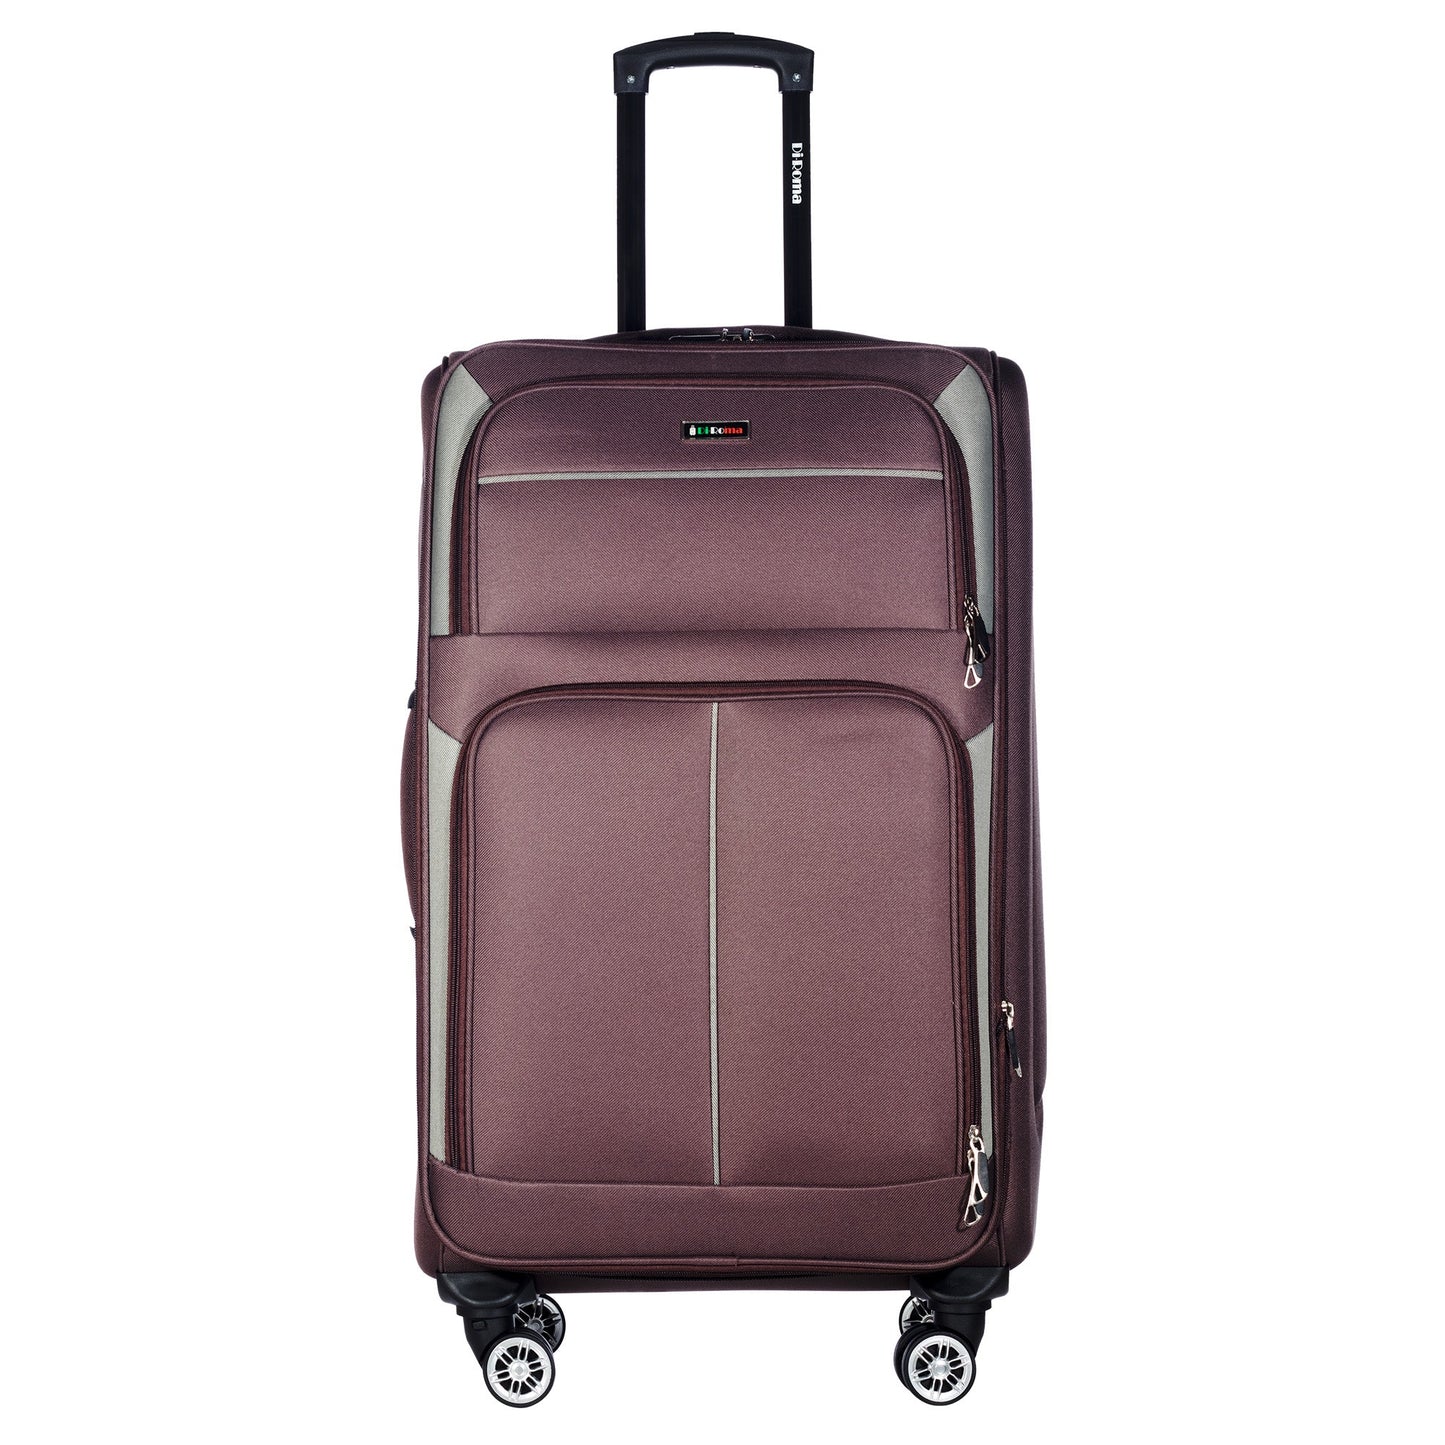 Star collection luggage brown (20/26/28/30") Suitcase